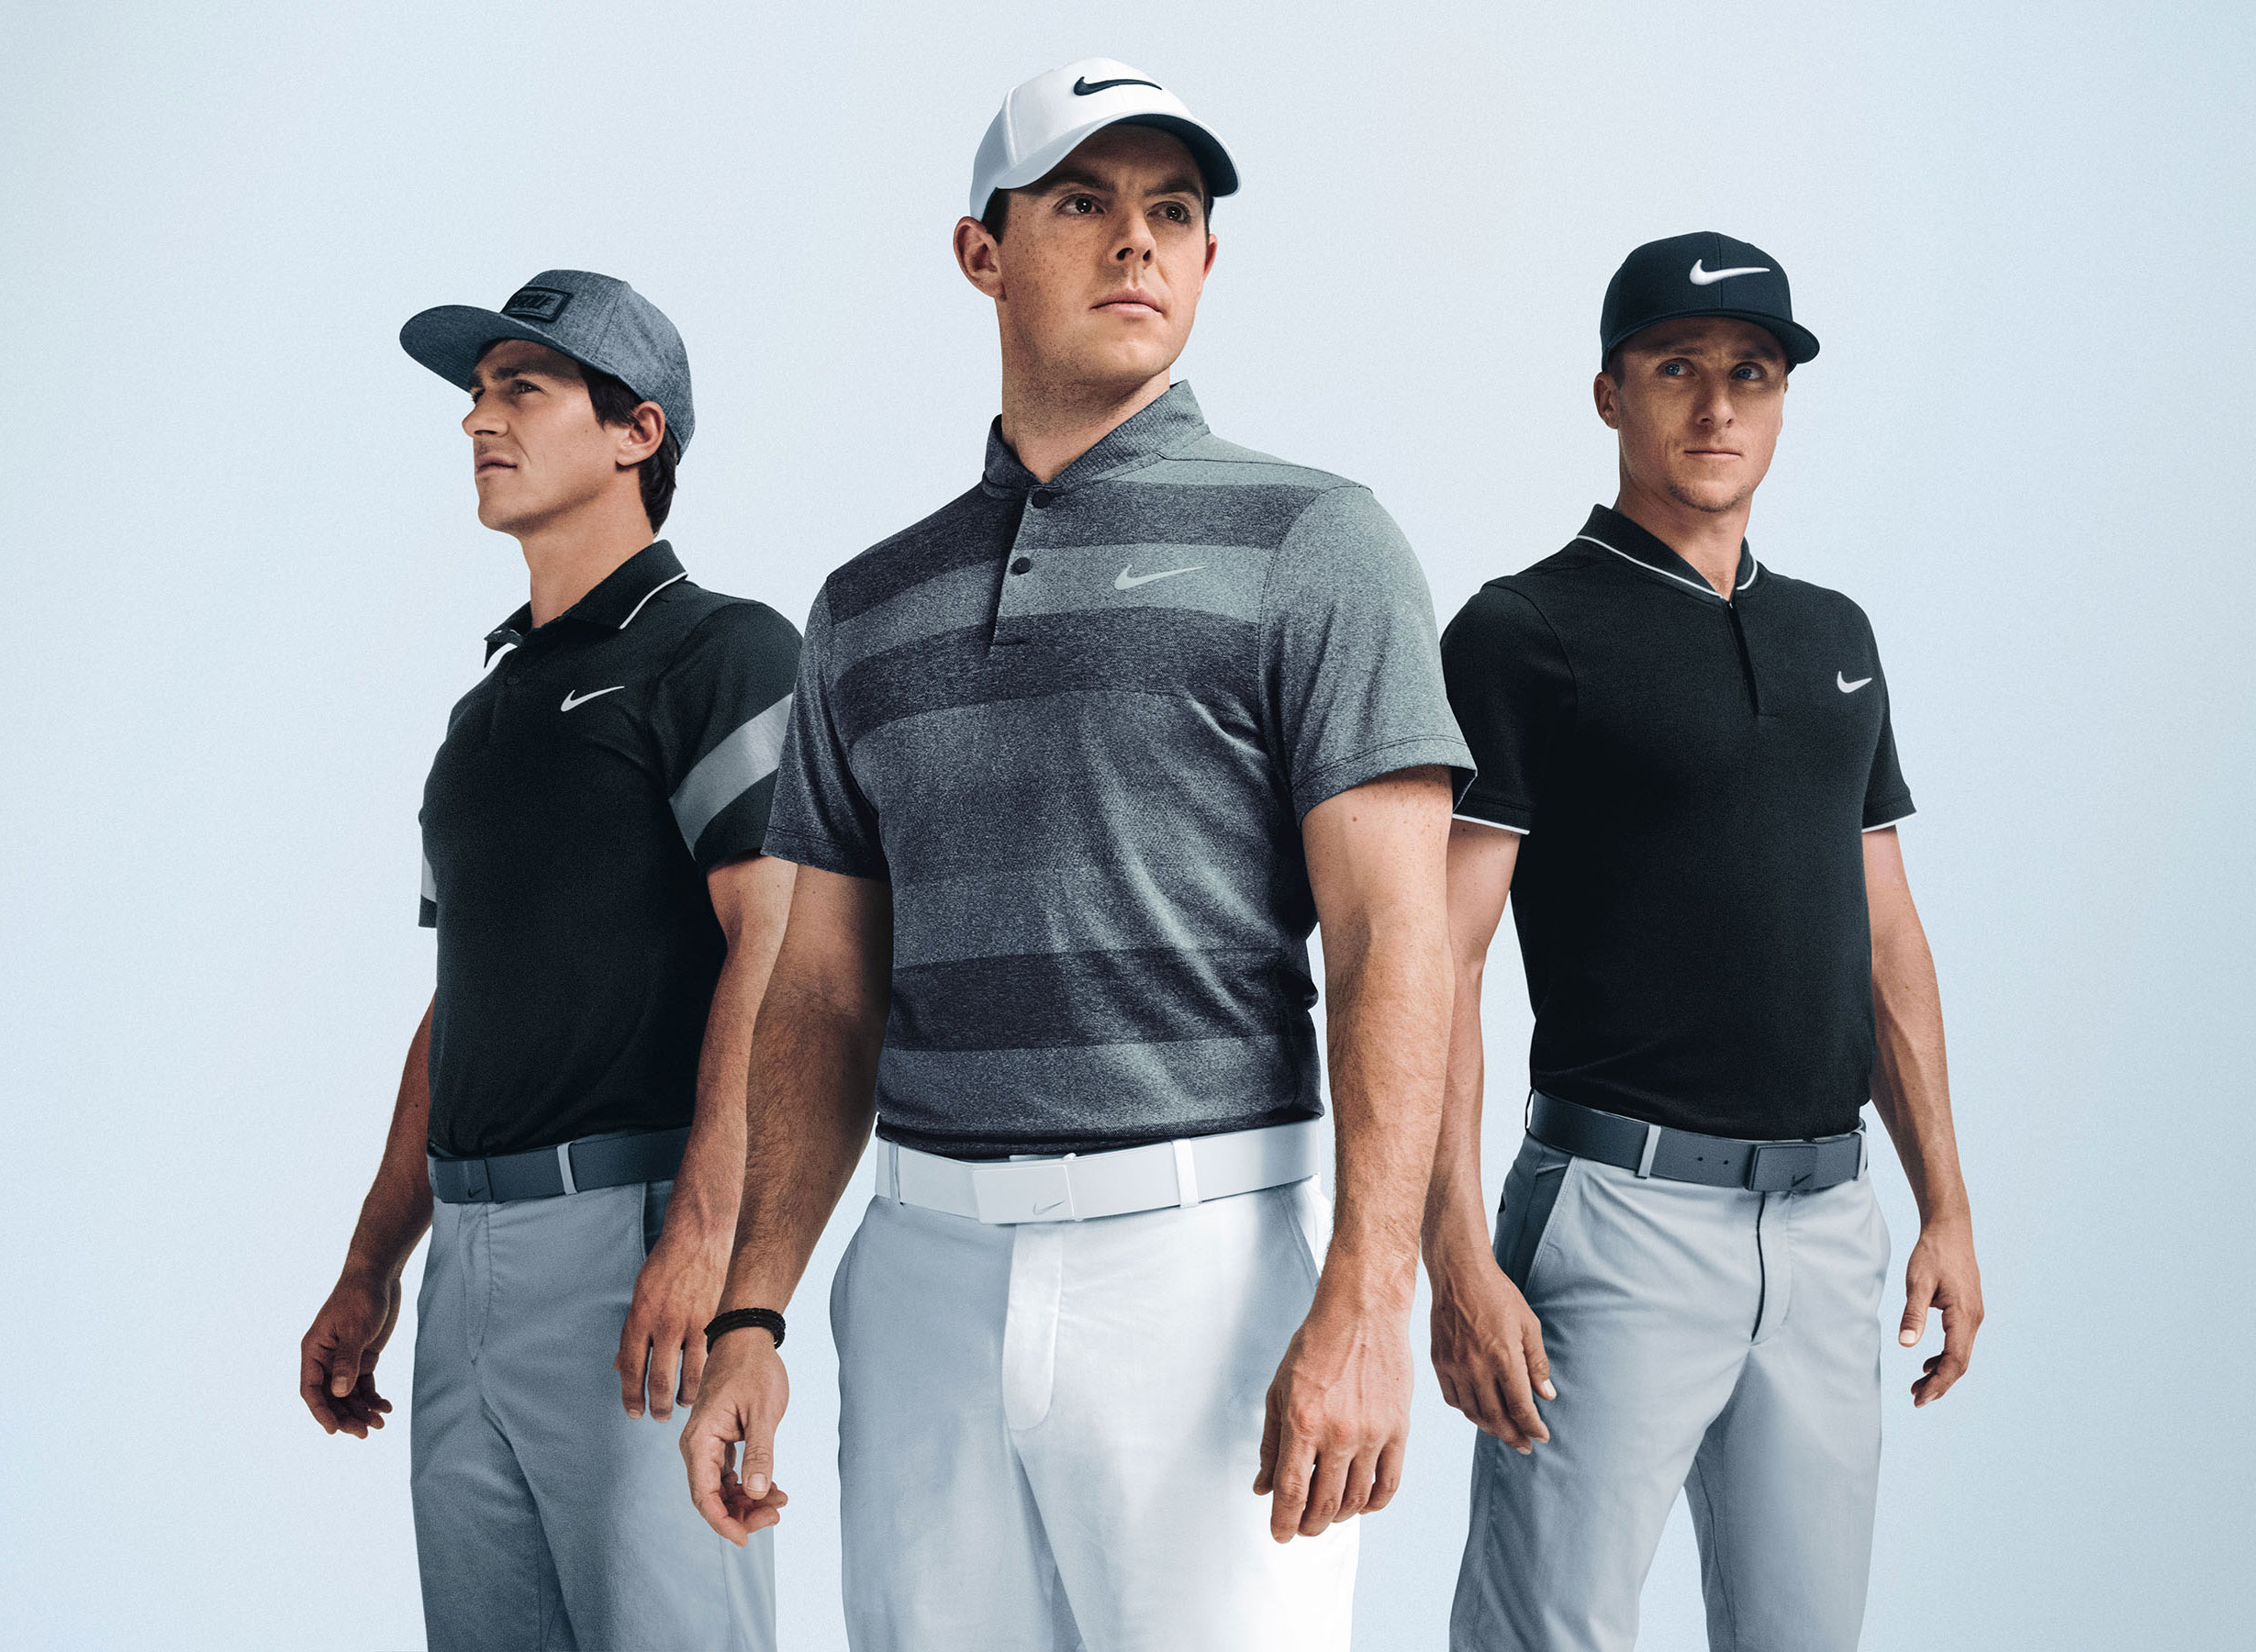 Nike takes a new approach to design with its latest golf shirts